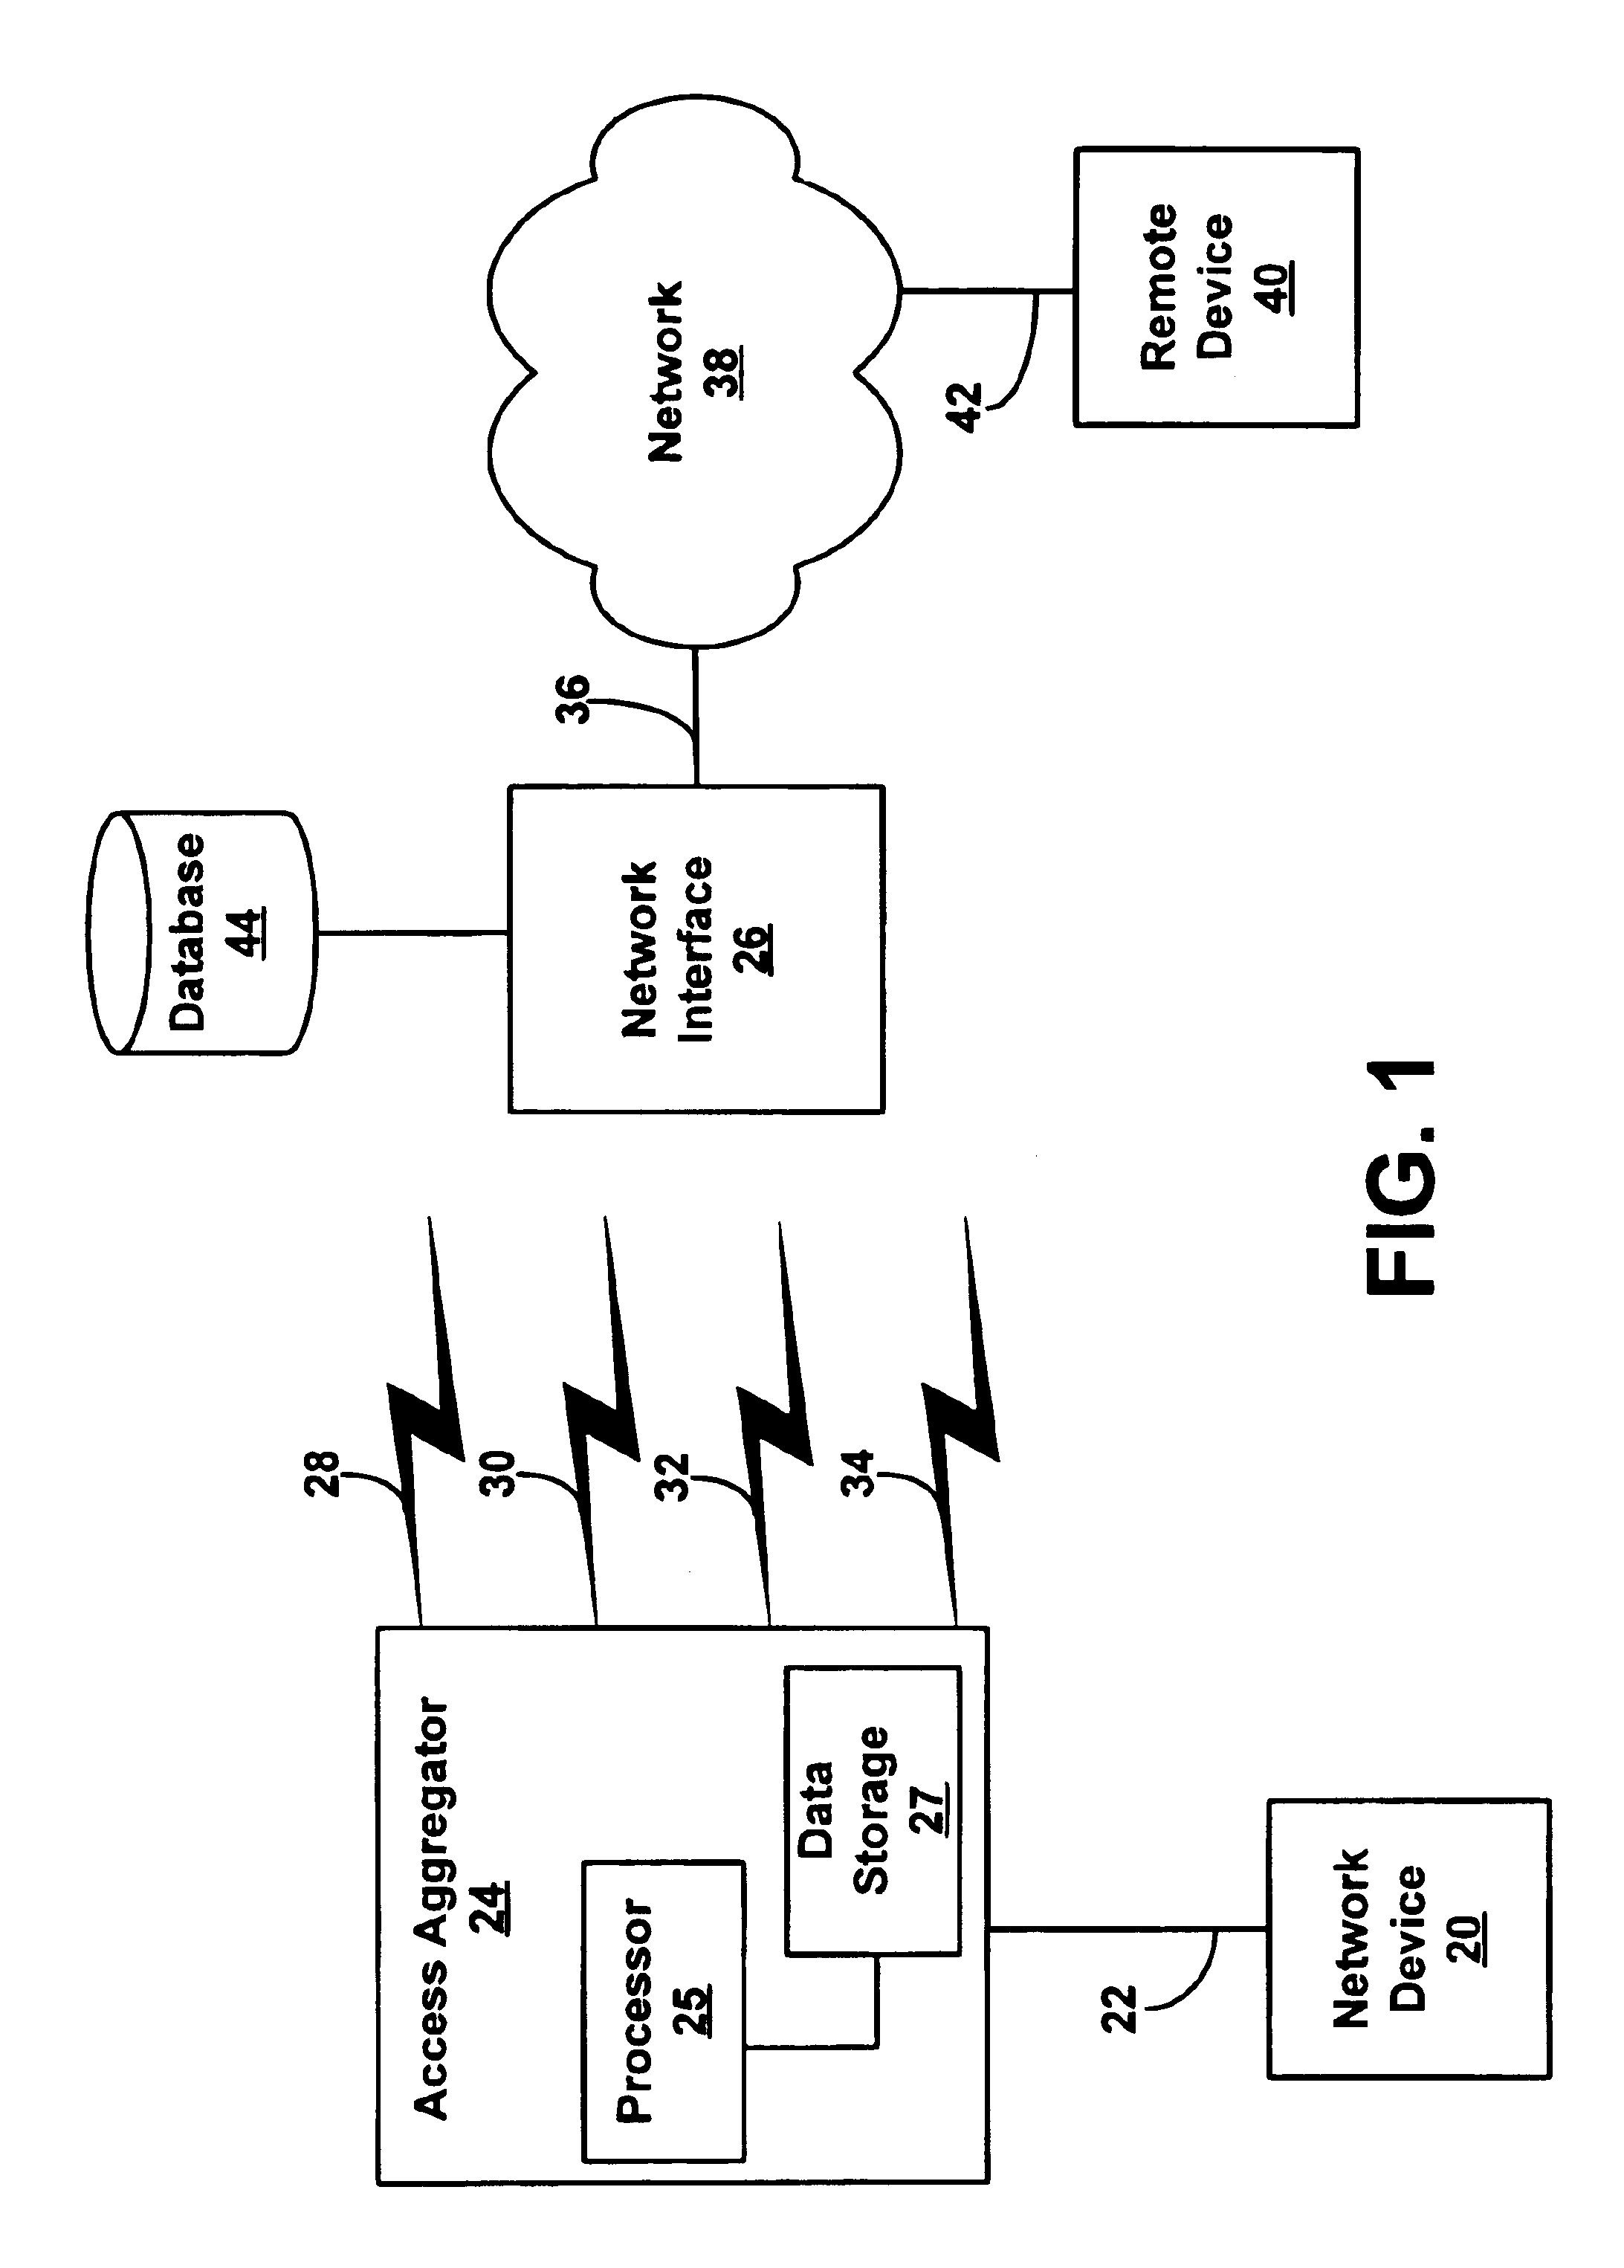 Method and system for increasing data rate in wireless communications through aggregation of data sessions